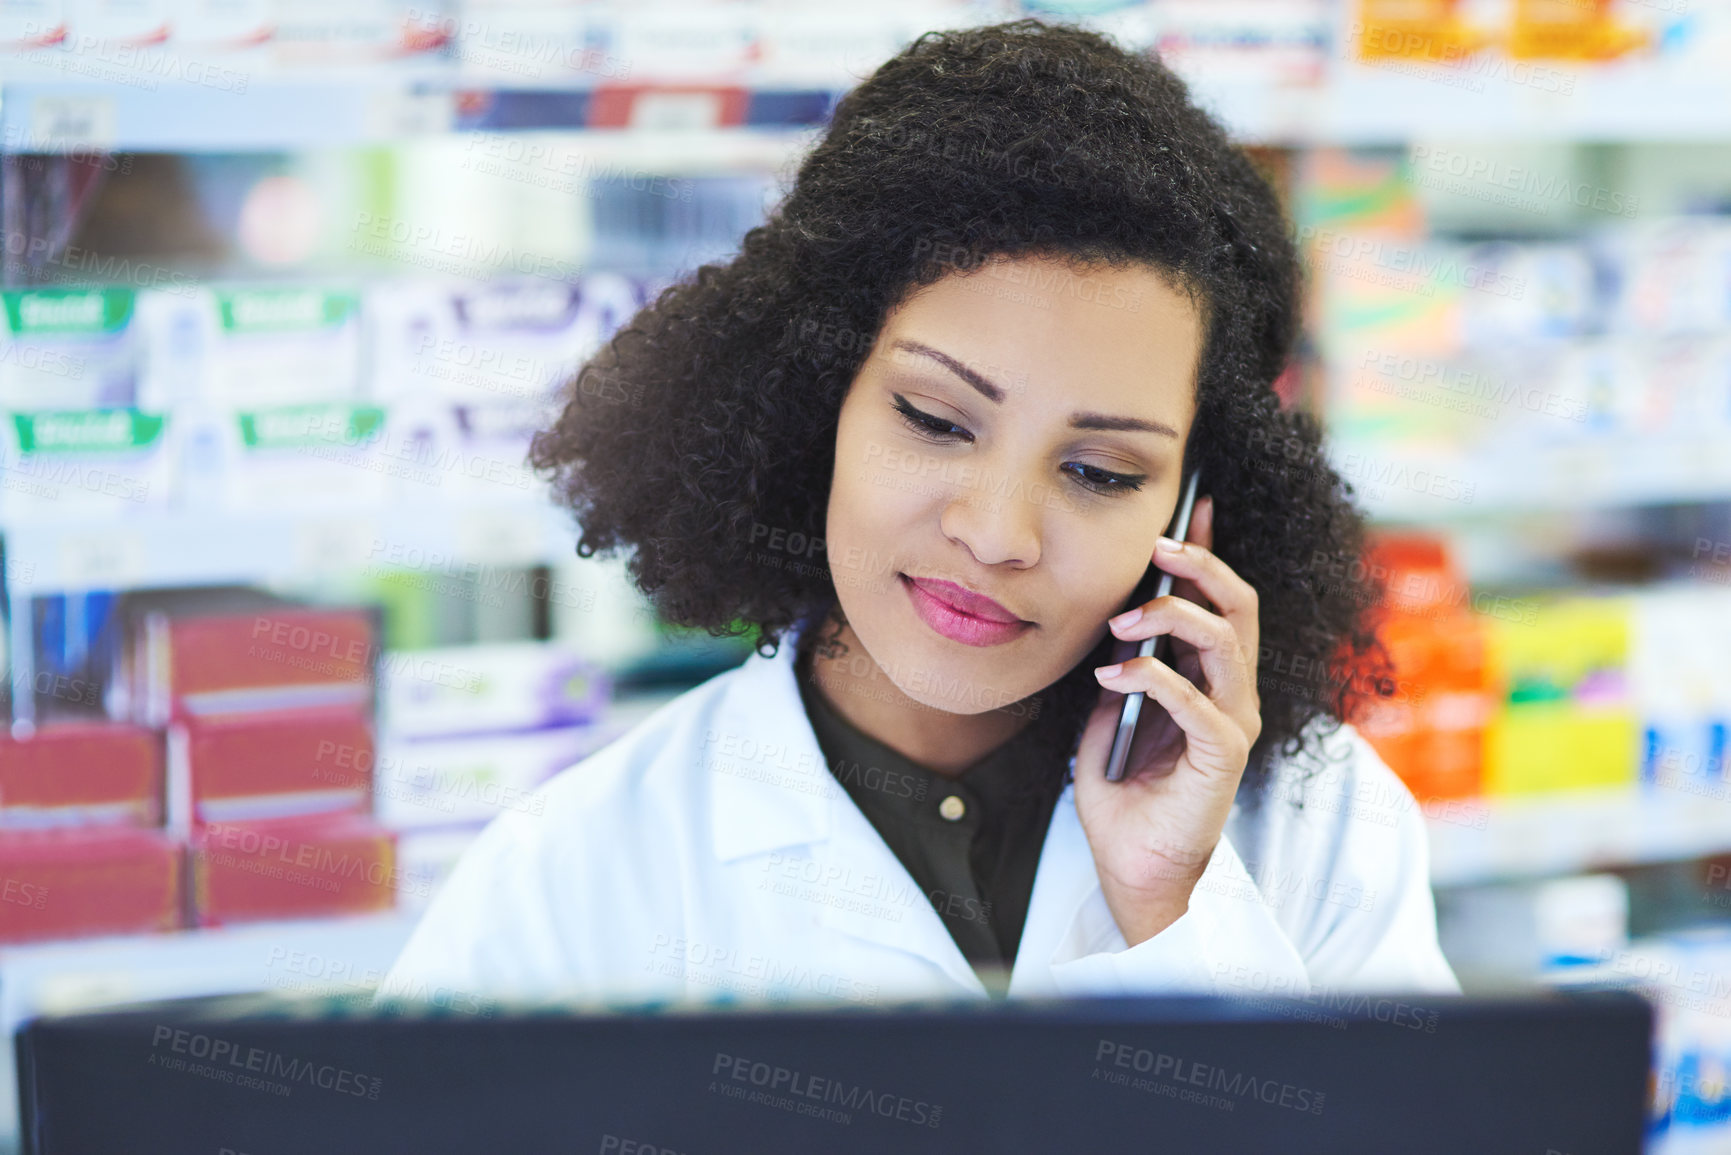 Buy stock photo Shot of a young woman using a computer and mobile phone at the counter of a pharmacy